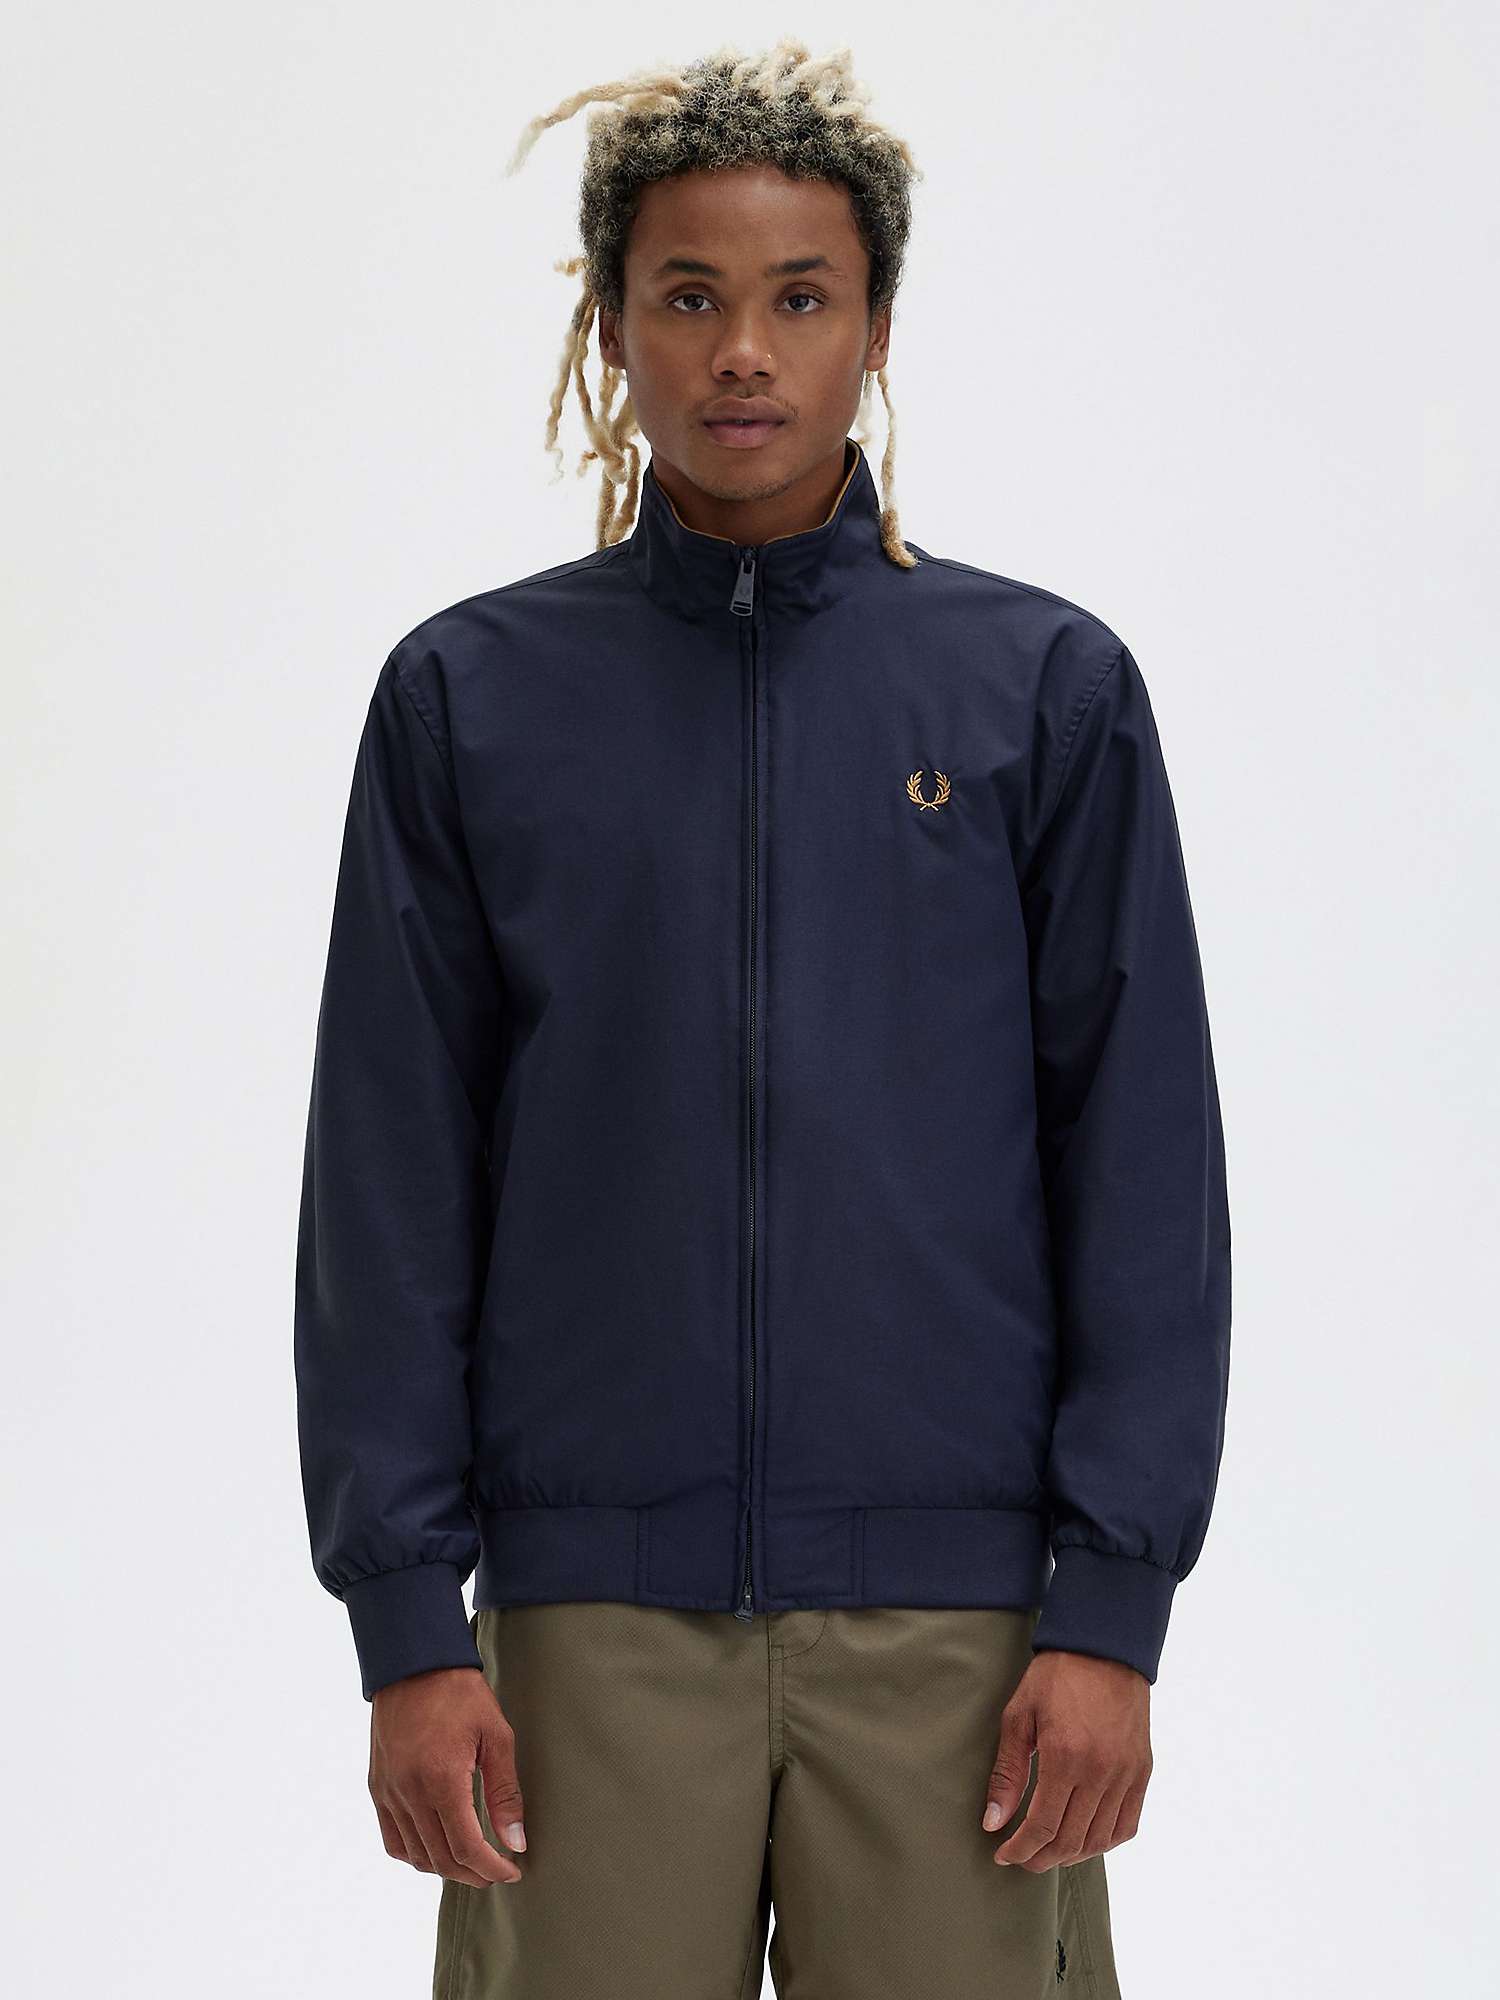 Buy Fred Perry Brentham Jacket Online at johnlewis.com